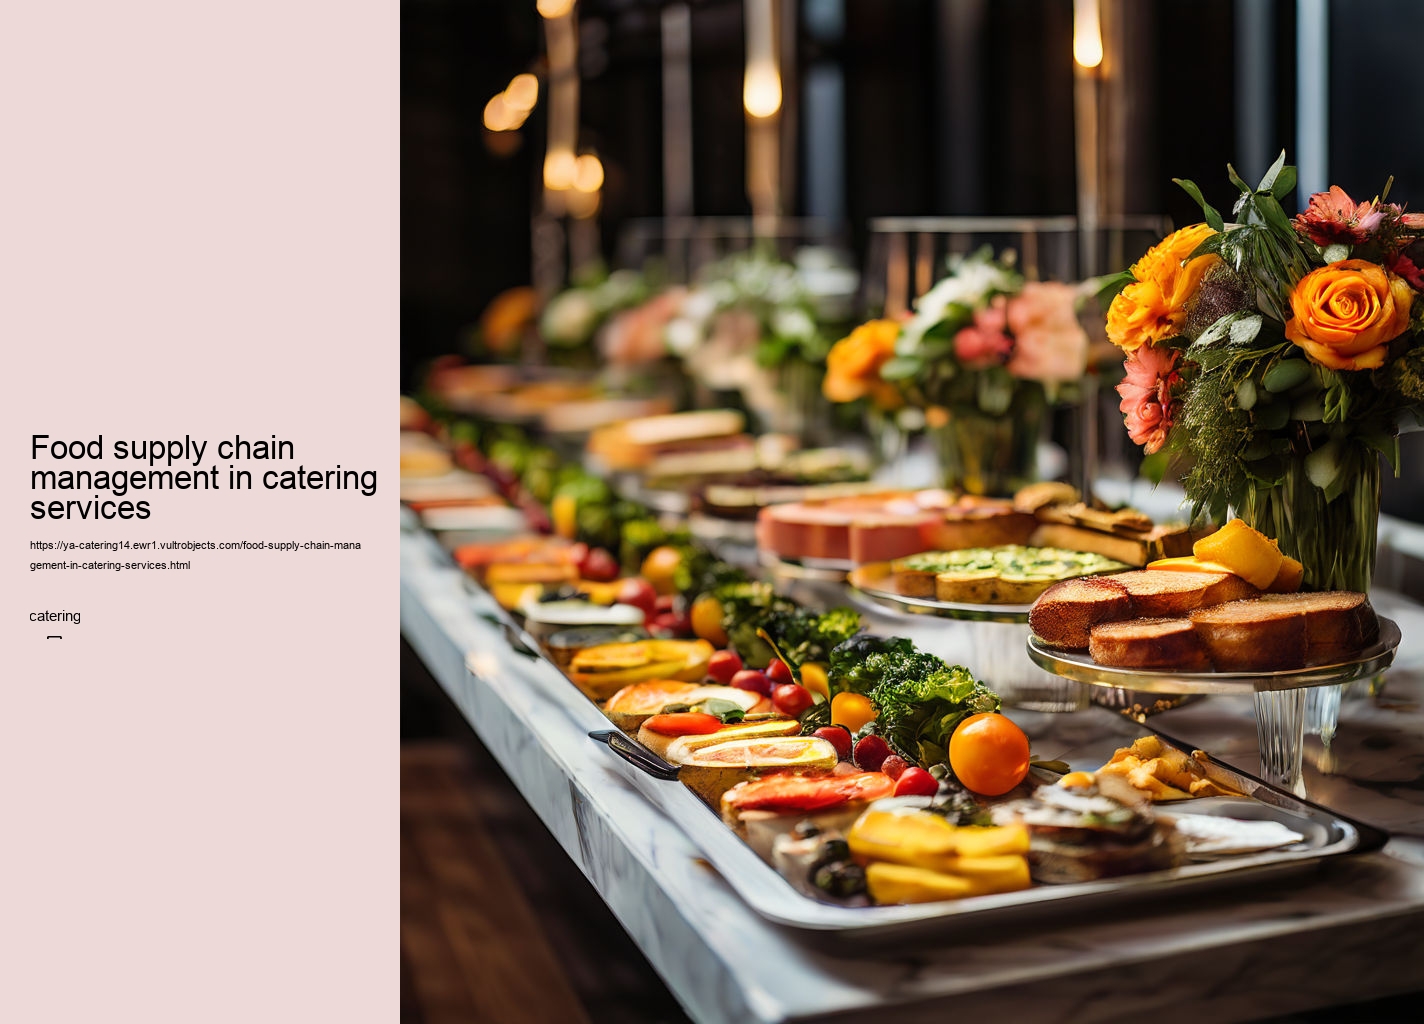 Food supply chain management in catering services